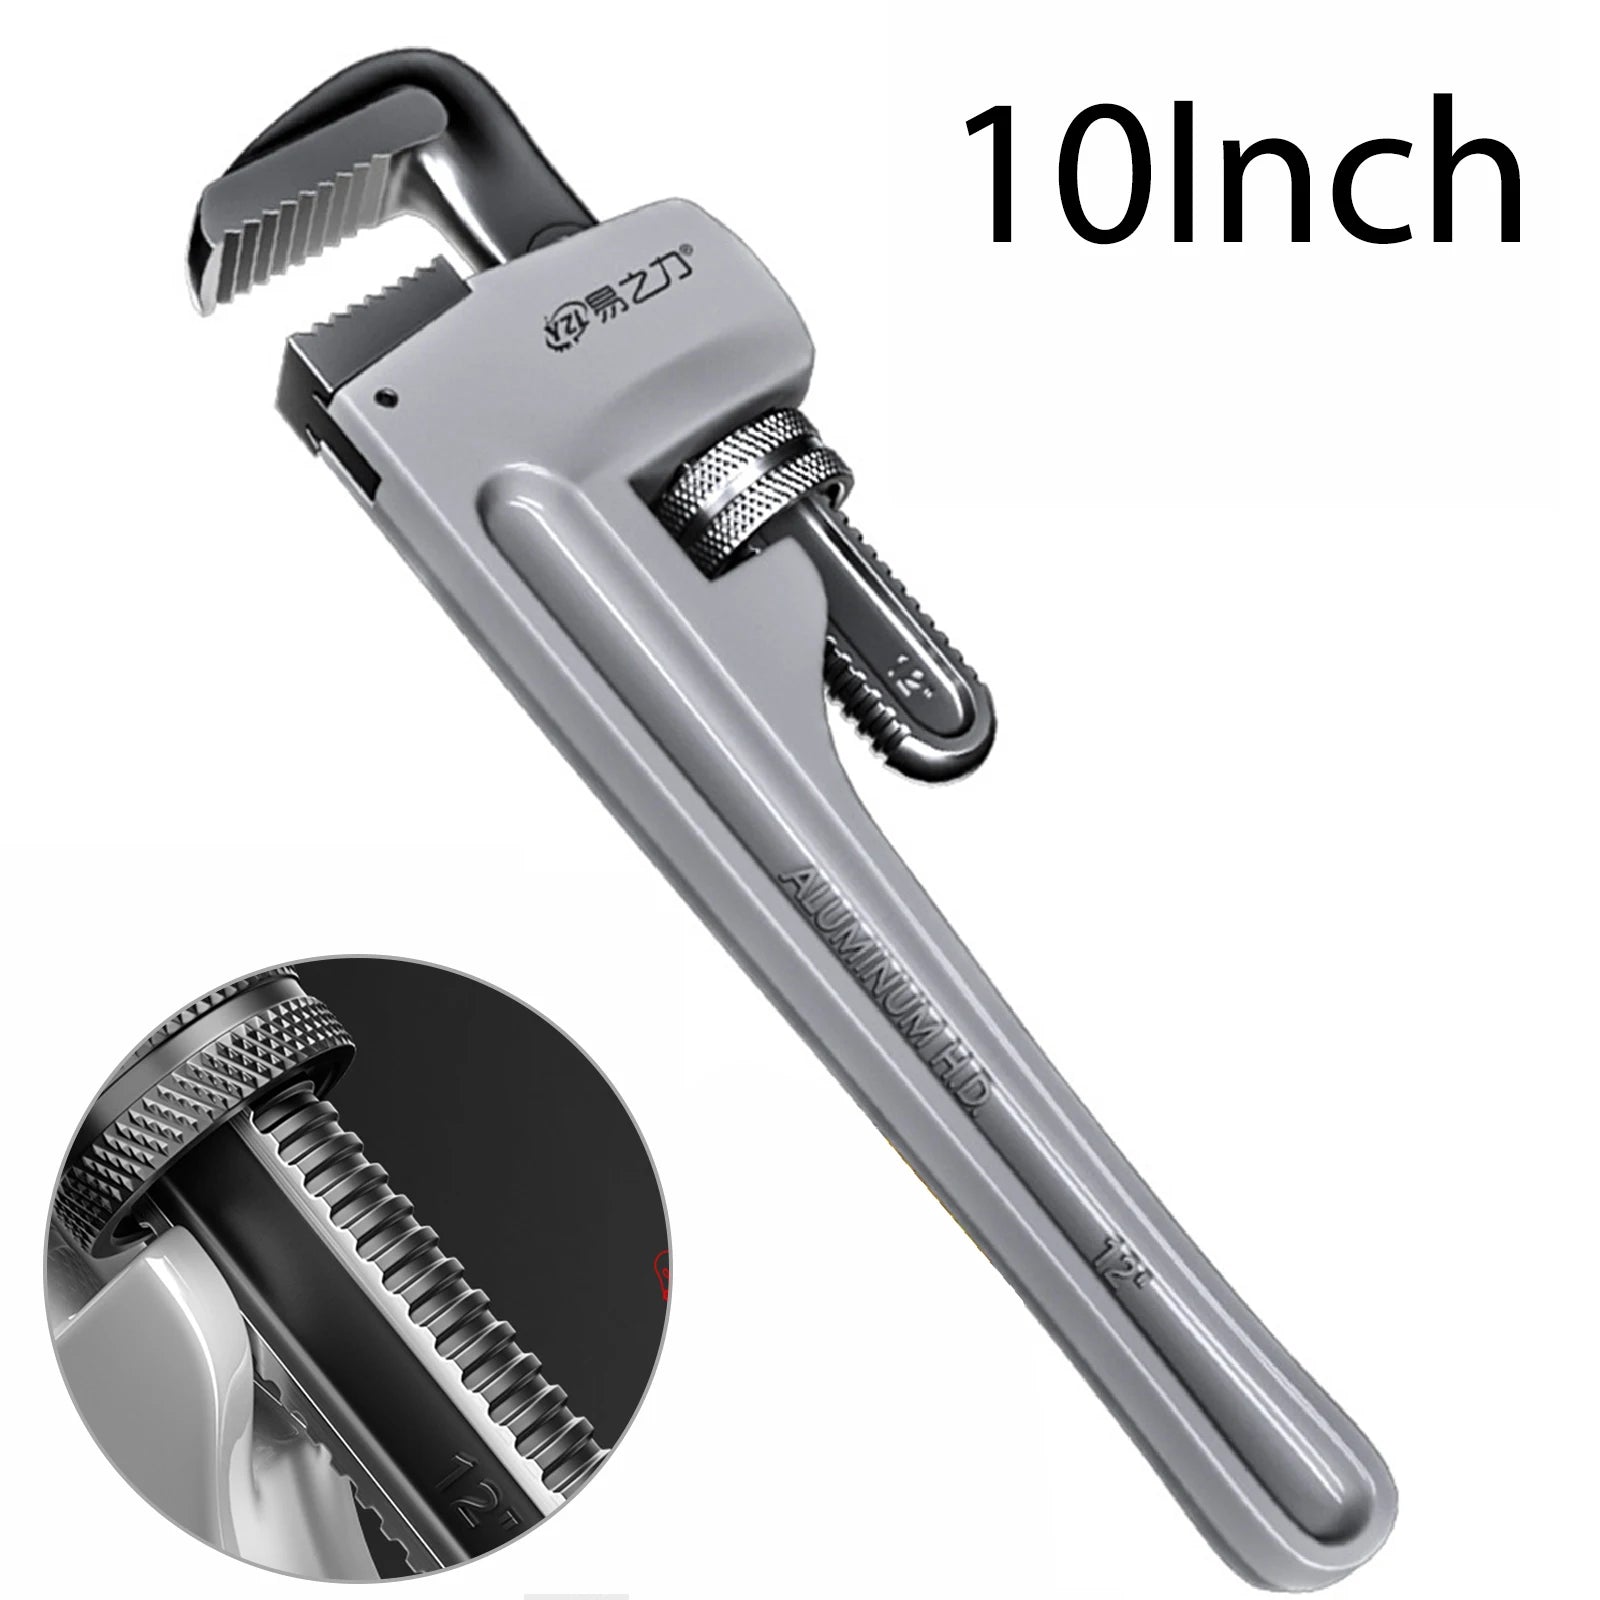 Aluminum Alloy Industrial Grade Pipe Wrench Household Universal Wrench Fast Dual-purpose Multi-functional Plumbing Pipe